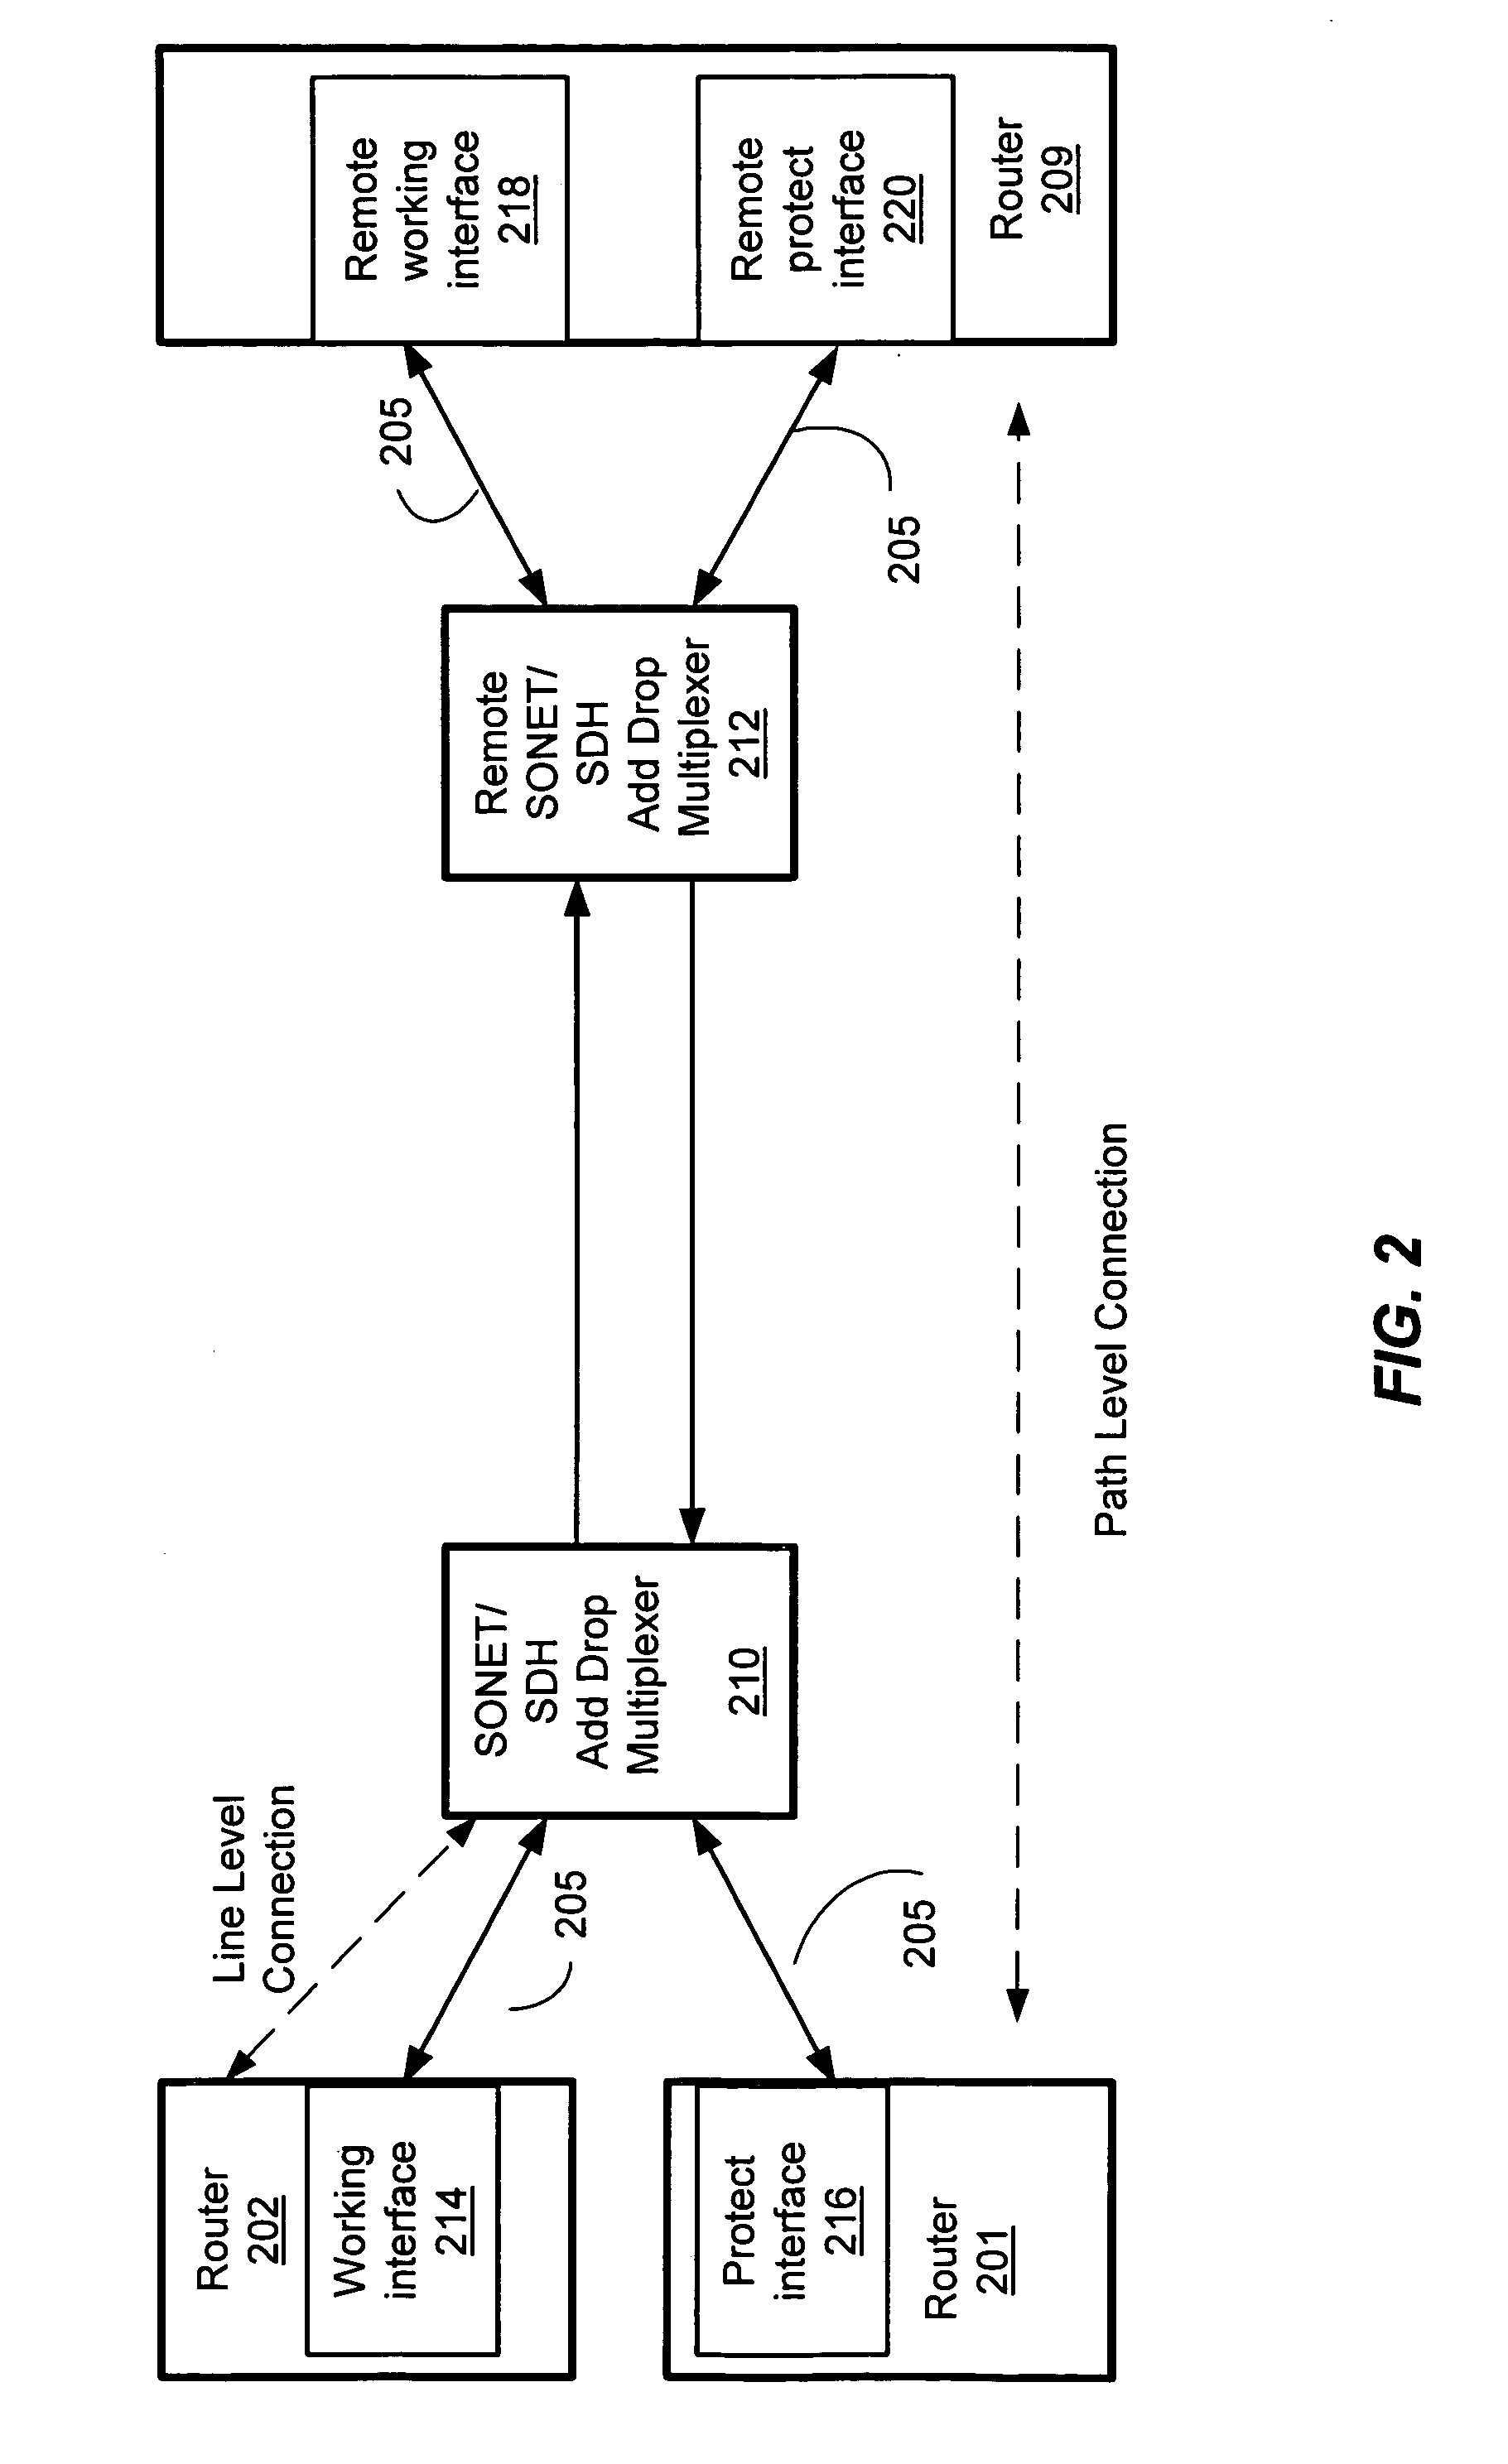 Mesh with projection channel access (MPCA)